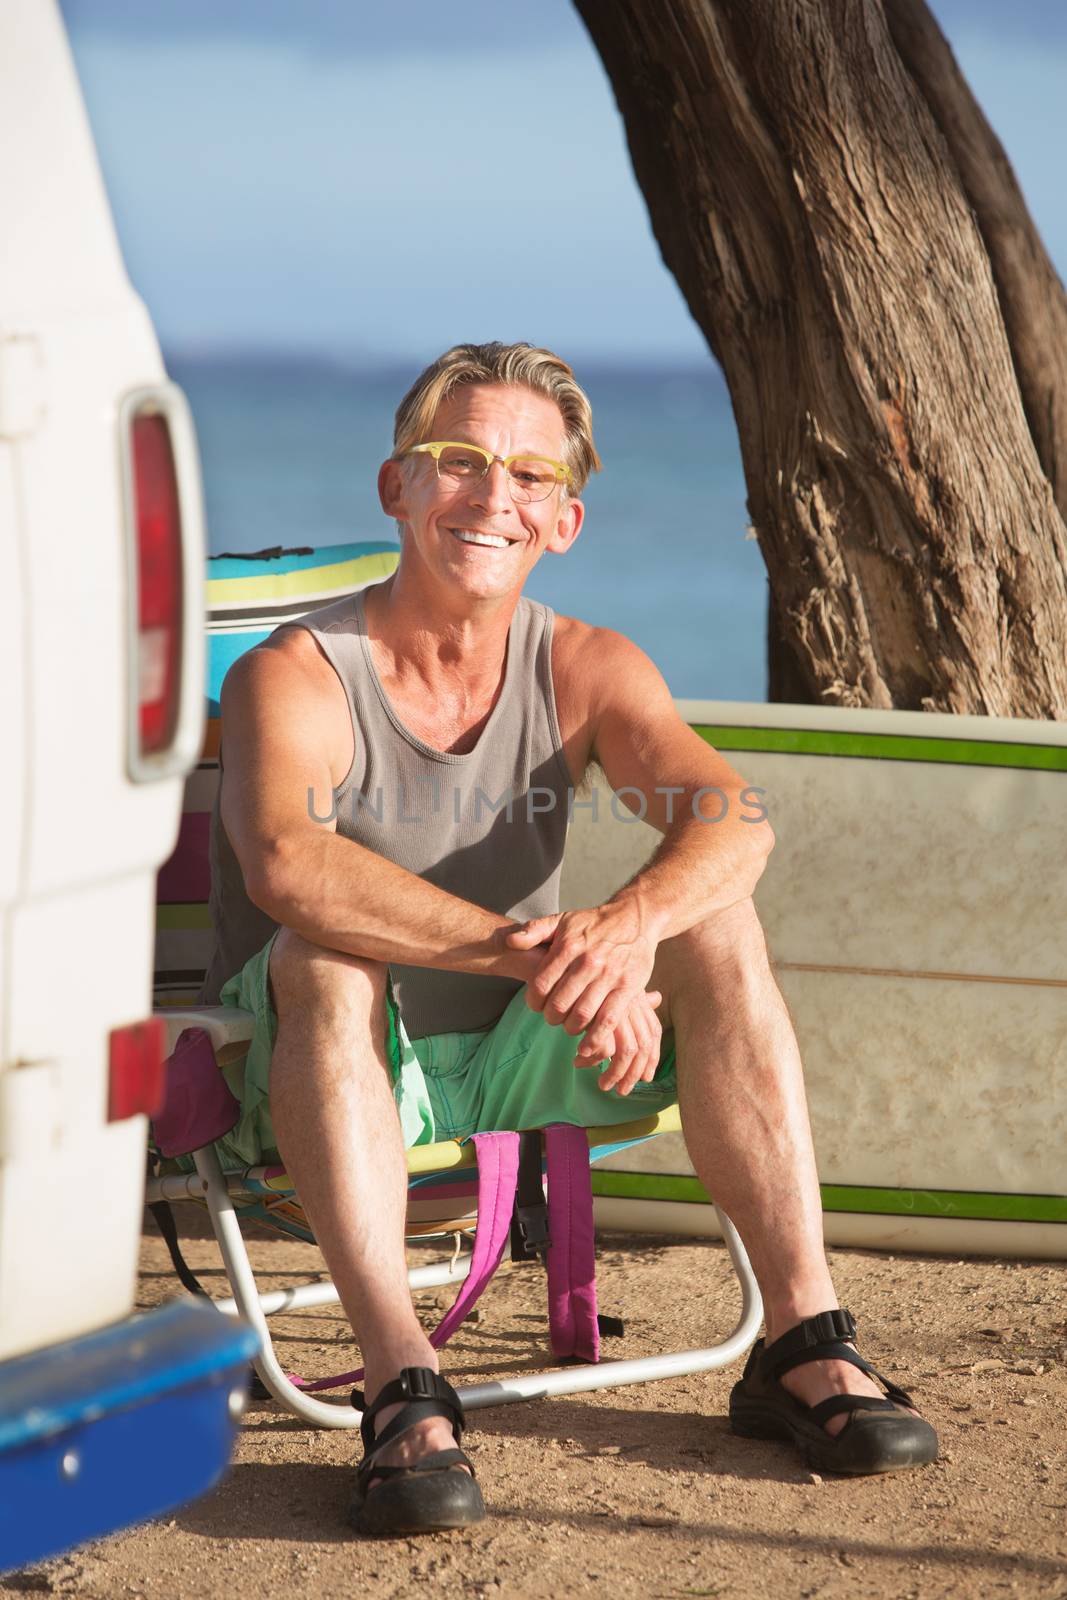 Smiling adult Caucasian surfer sitting outdoors